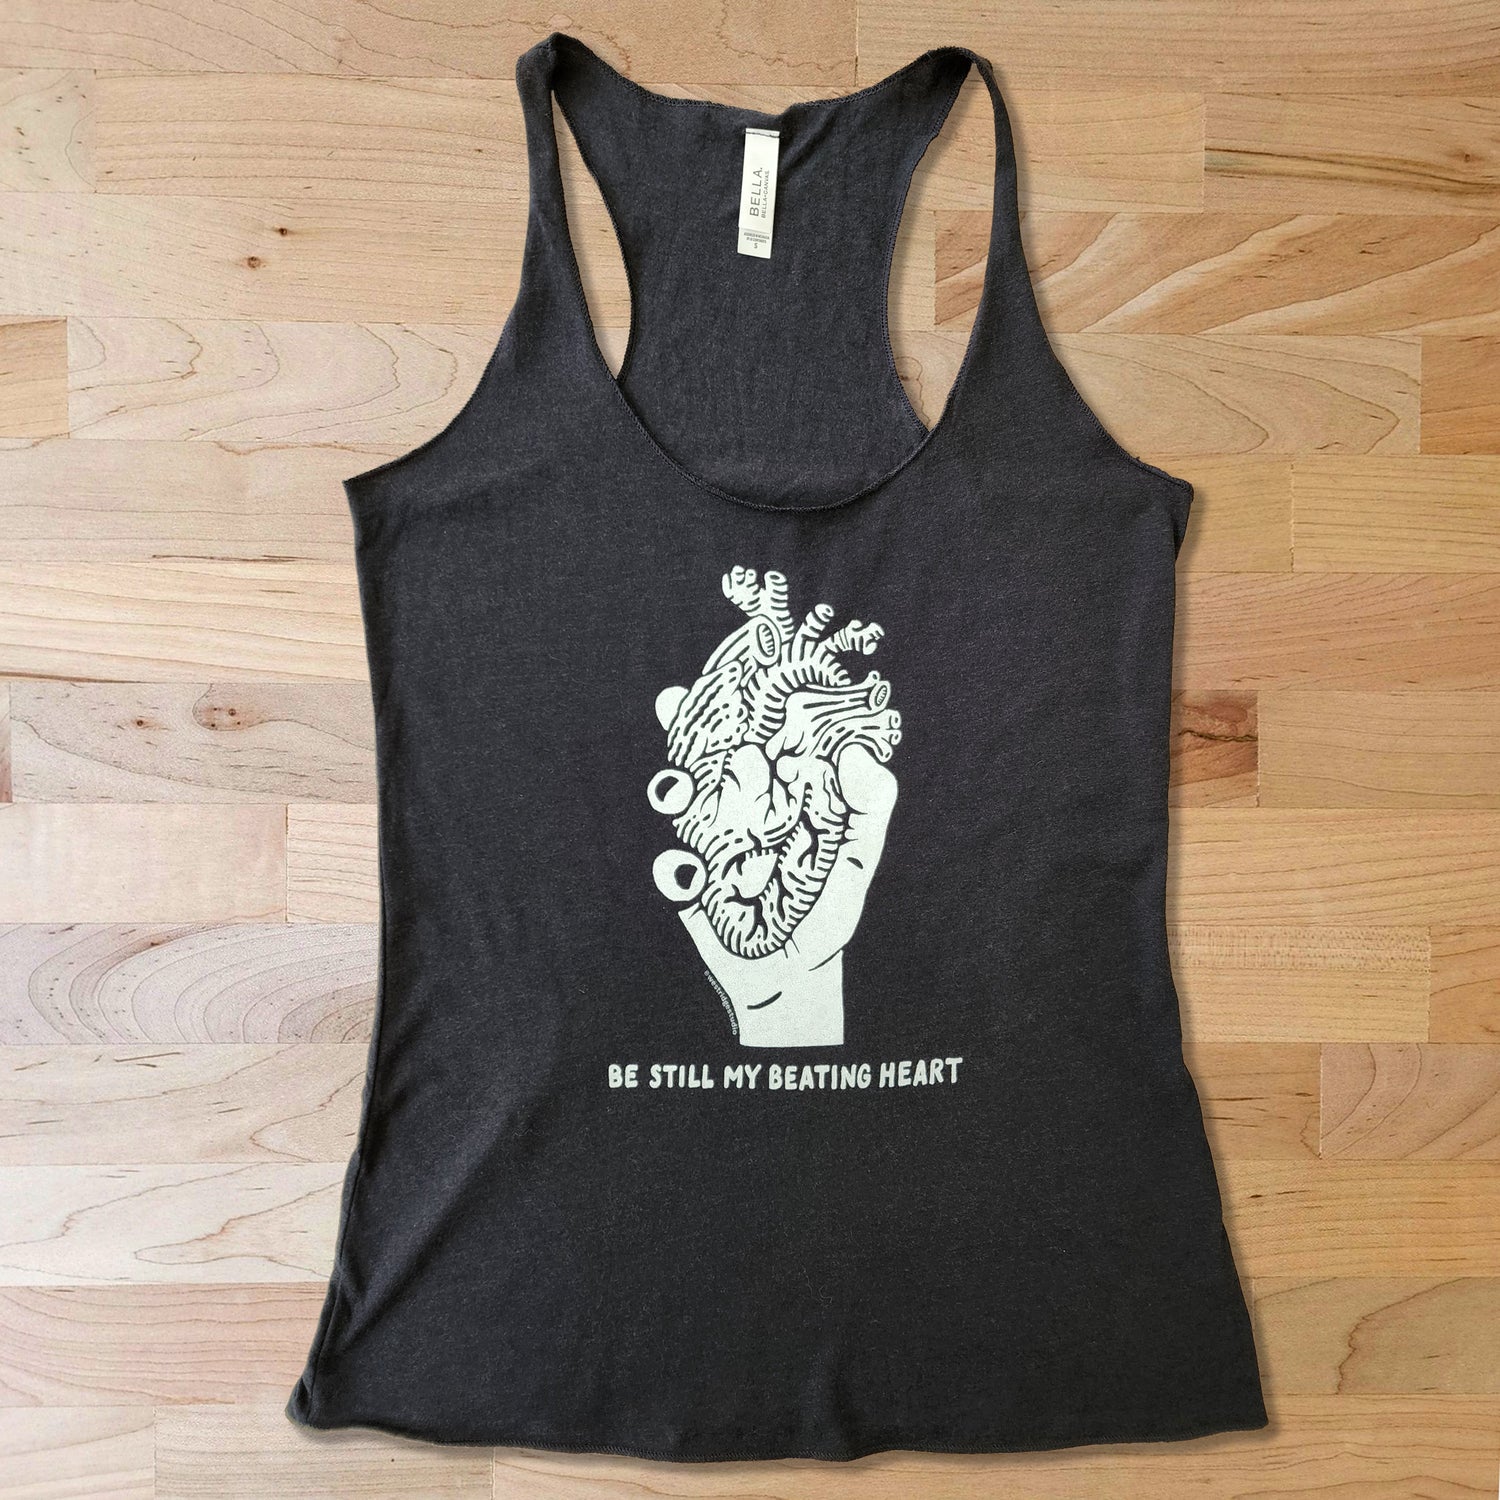 Be Still My Beating Heart graphic black tank top for women